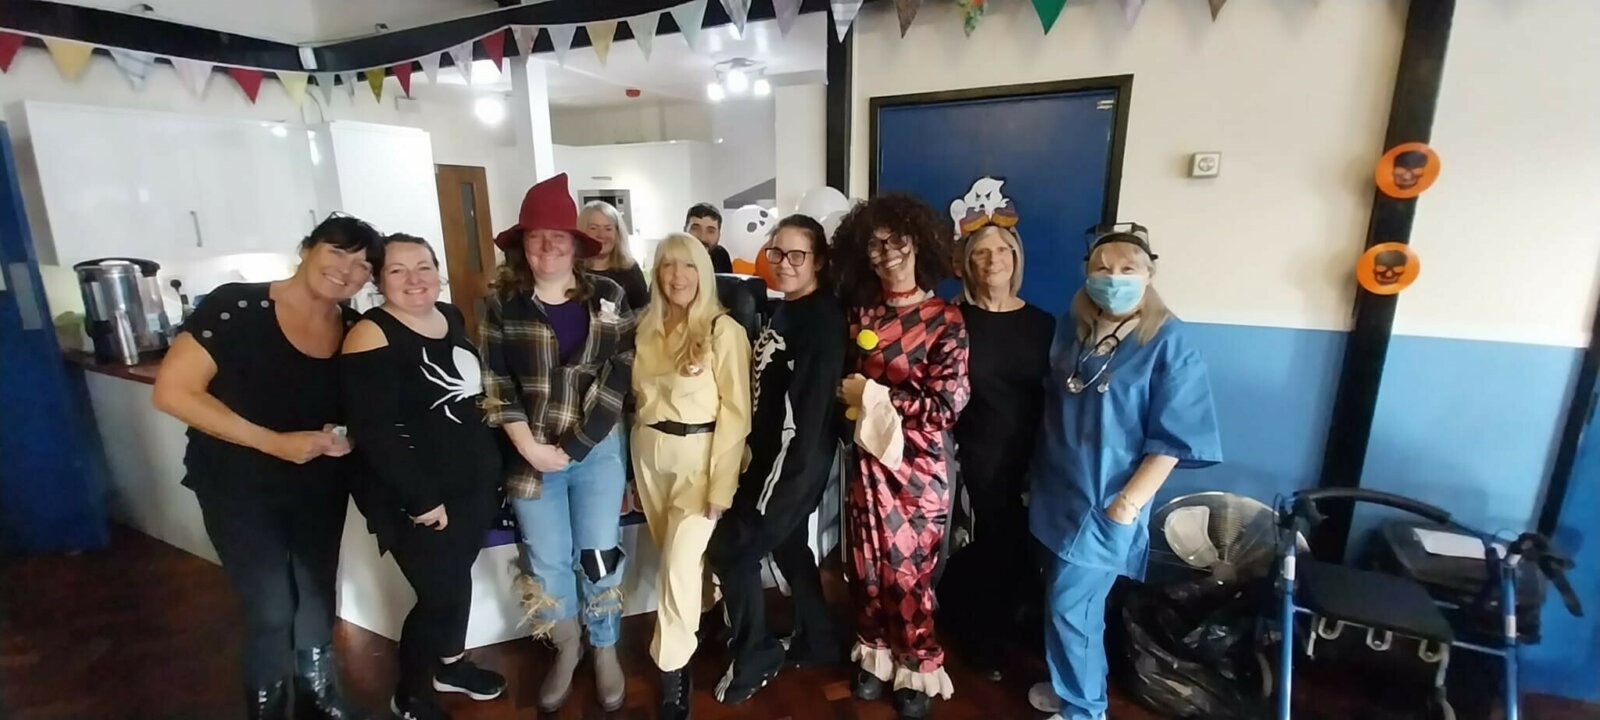 Afternoon Tea Crew aprons swapped Halloween costumes